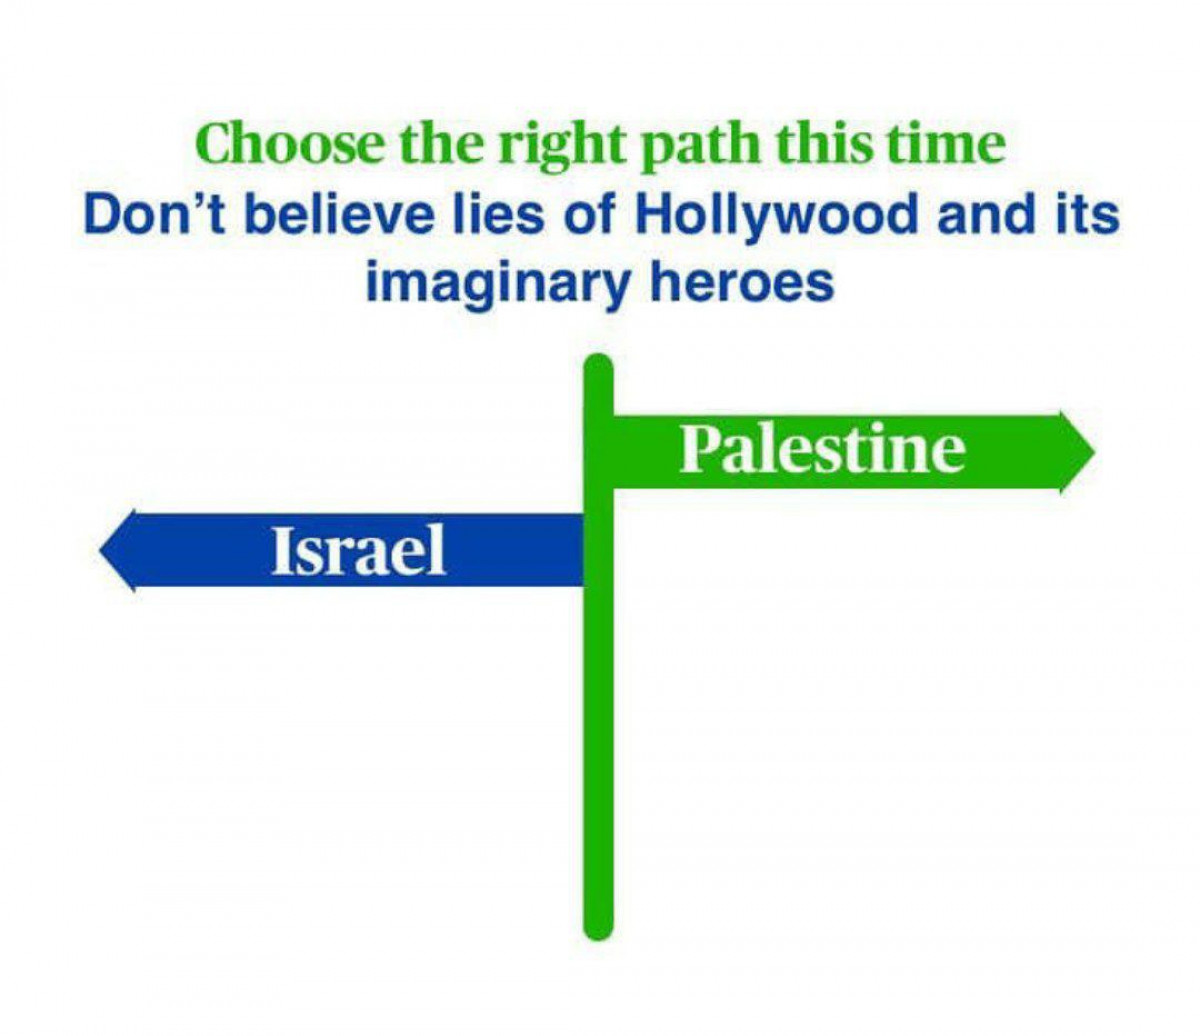 Choose the right path this time